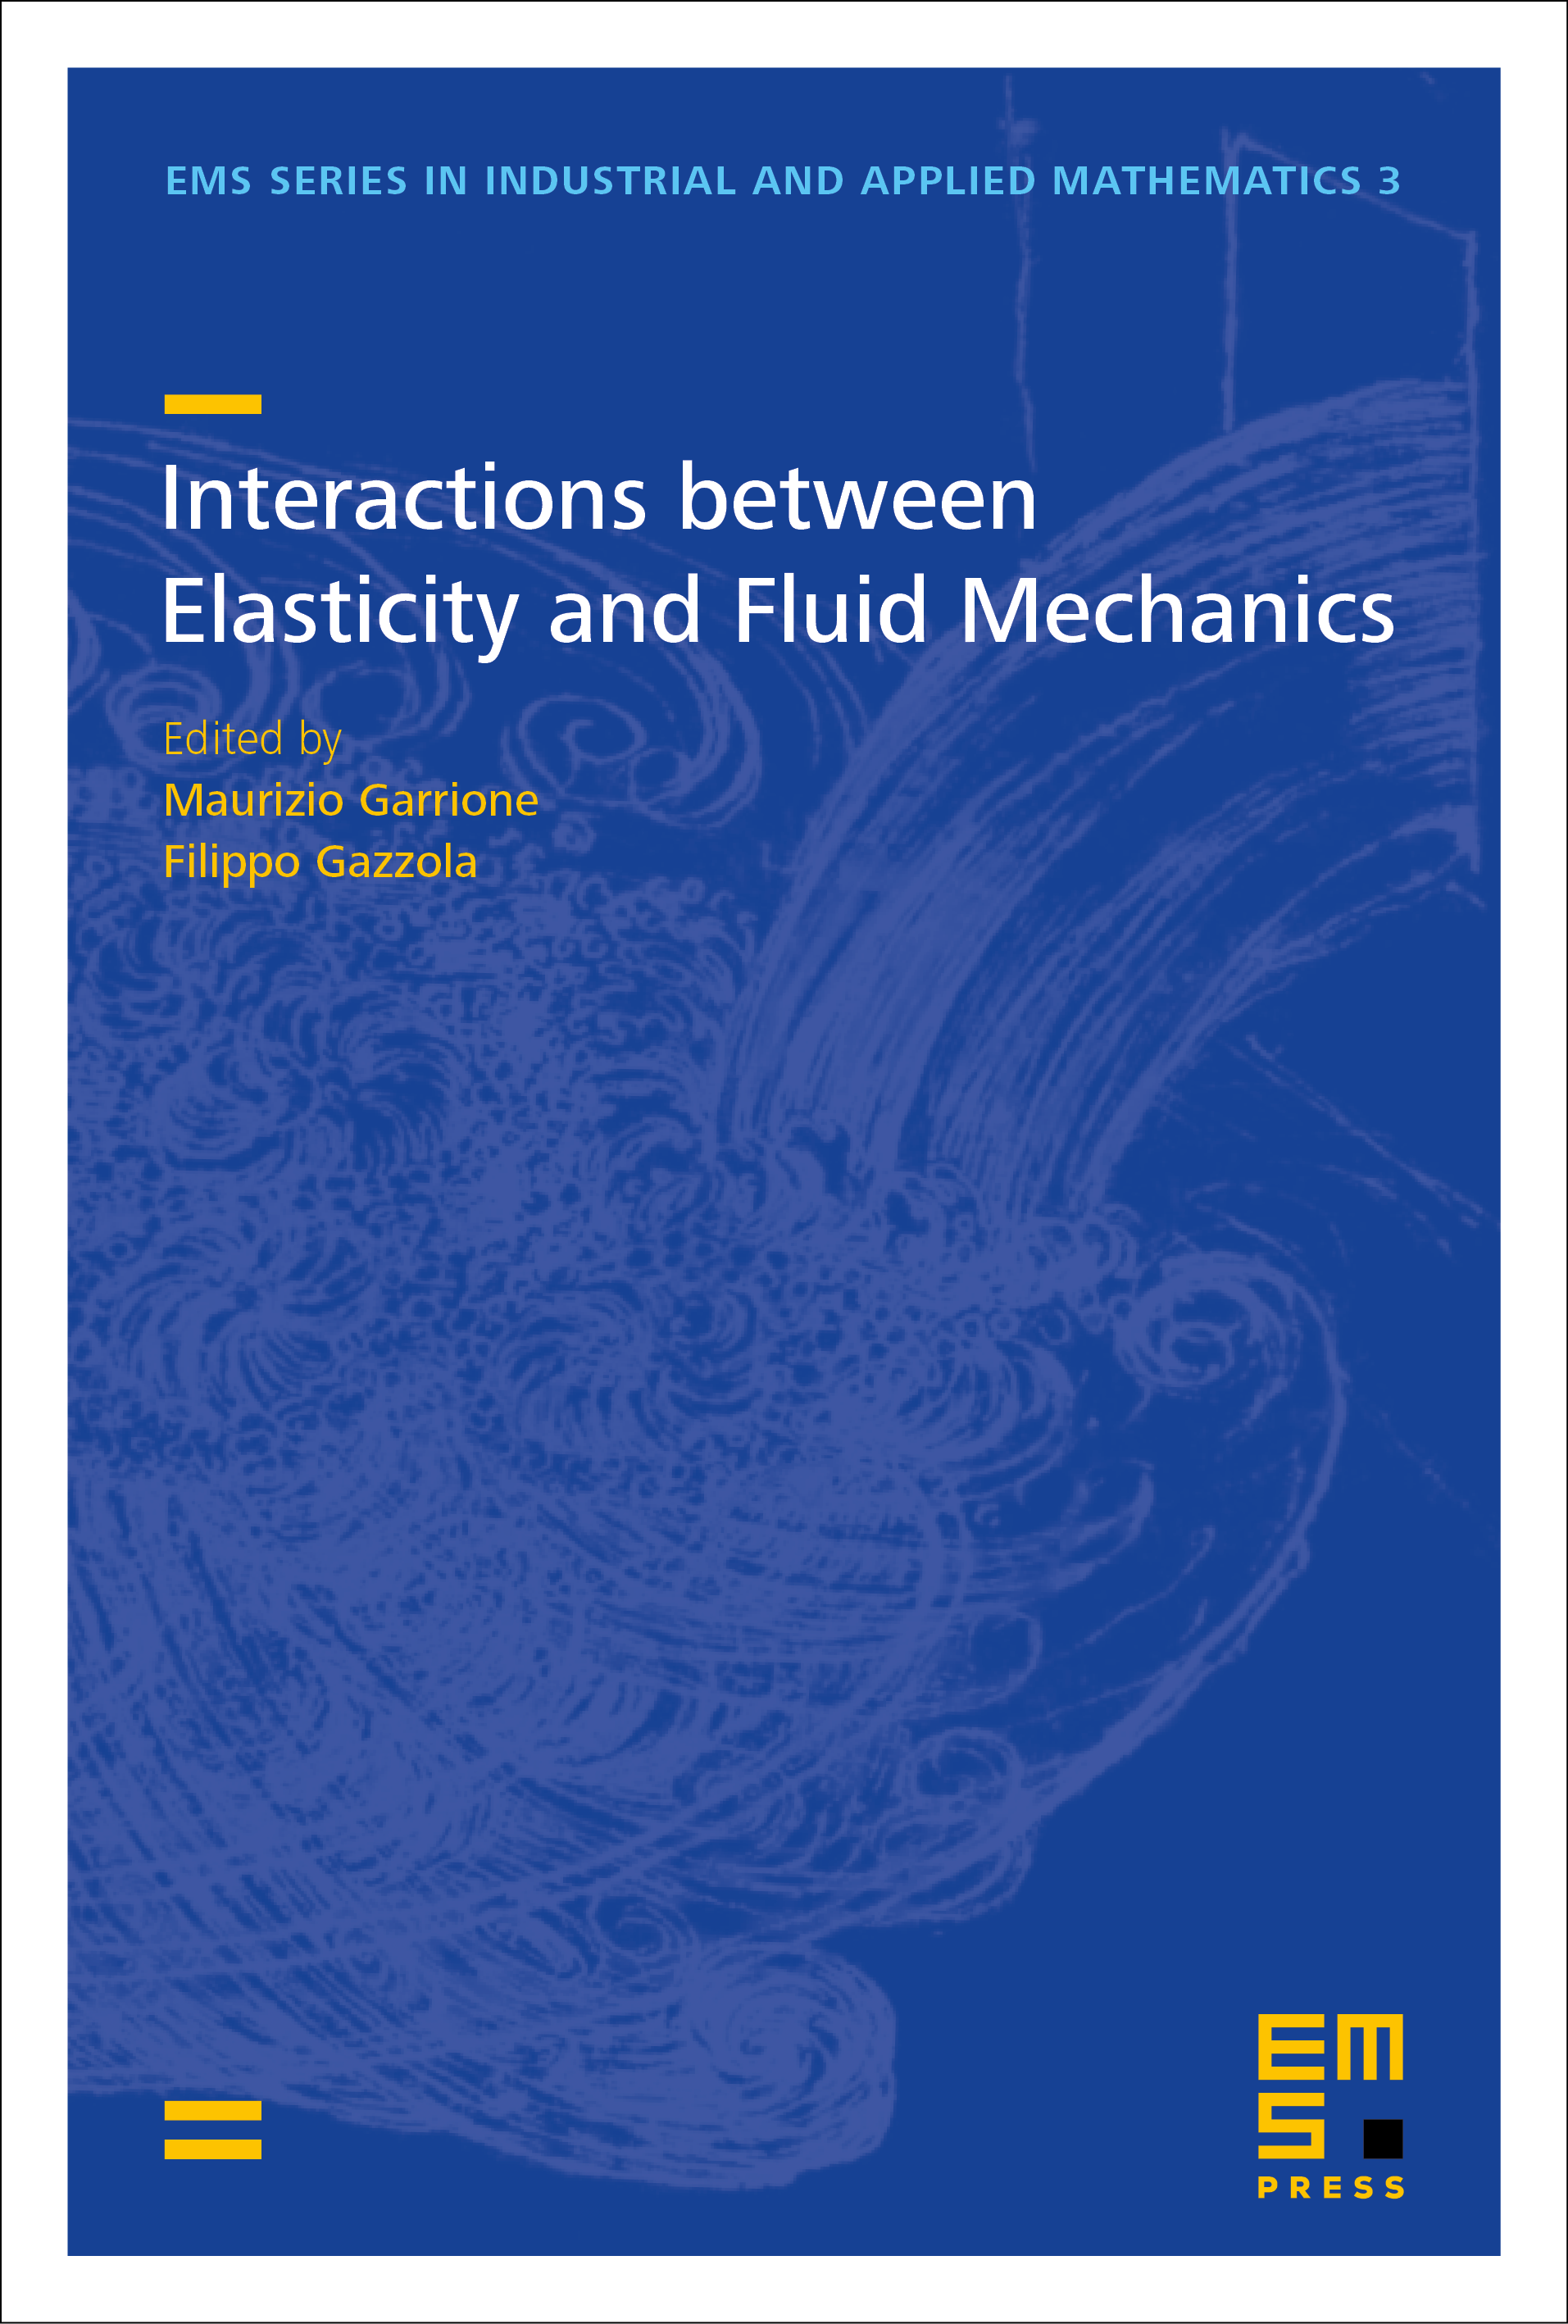 A numerical characterization of the attractor for a fluid-structure interaction problem cover